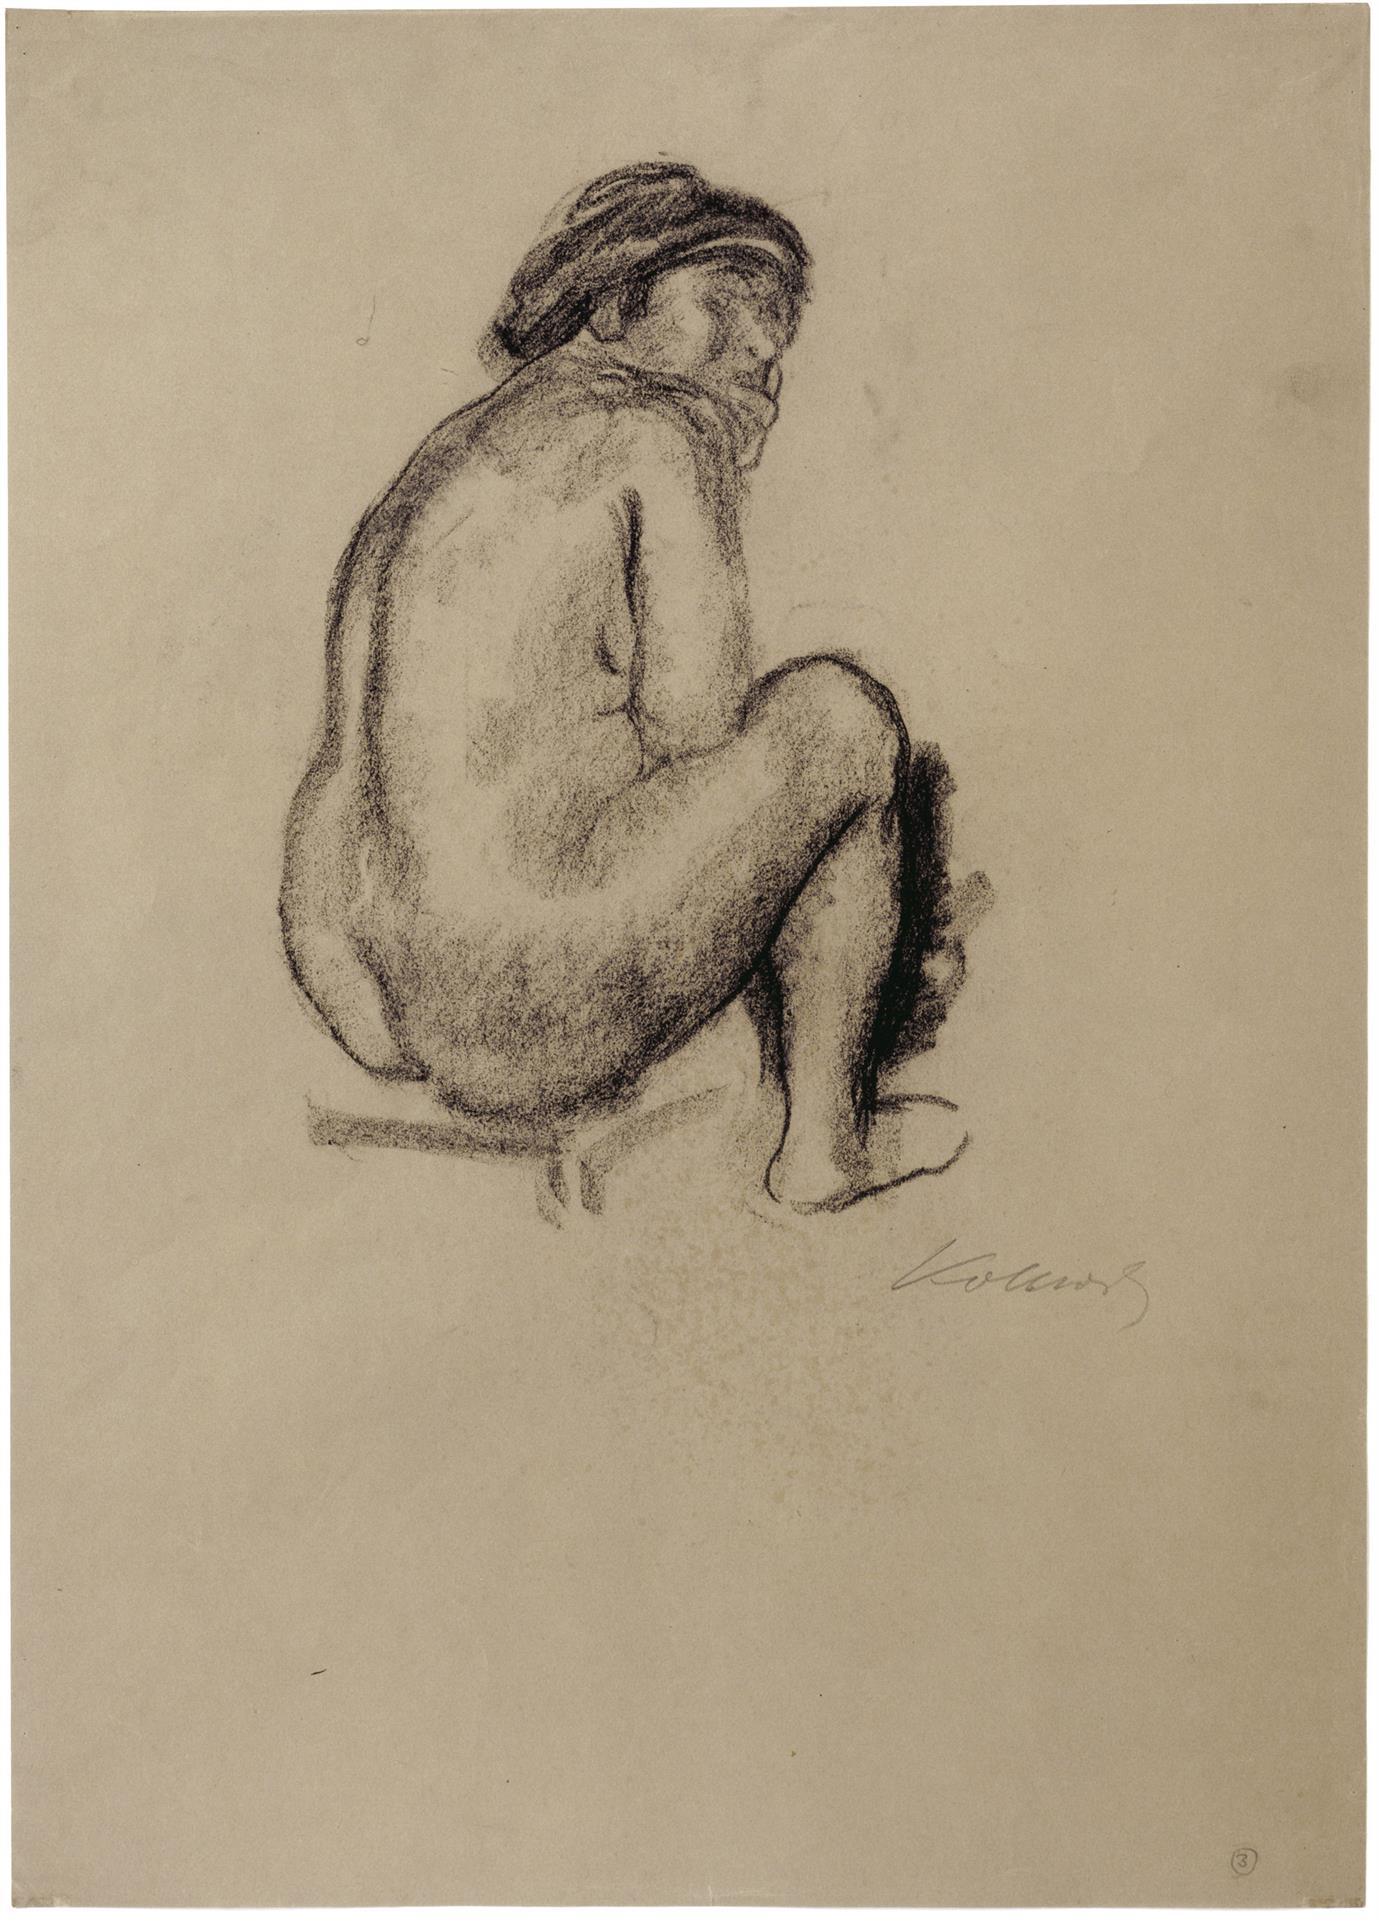 Käthe Kollwitz, Seated female Nude from behind, looking right, c 1910-1912, charcoal on brown paper, NT 674, Cologne Kollwitz Collection © Käthe Kollwitz Museum Köln